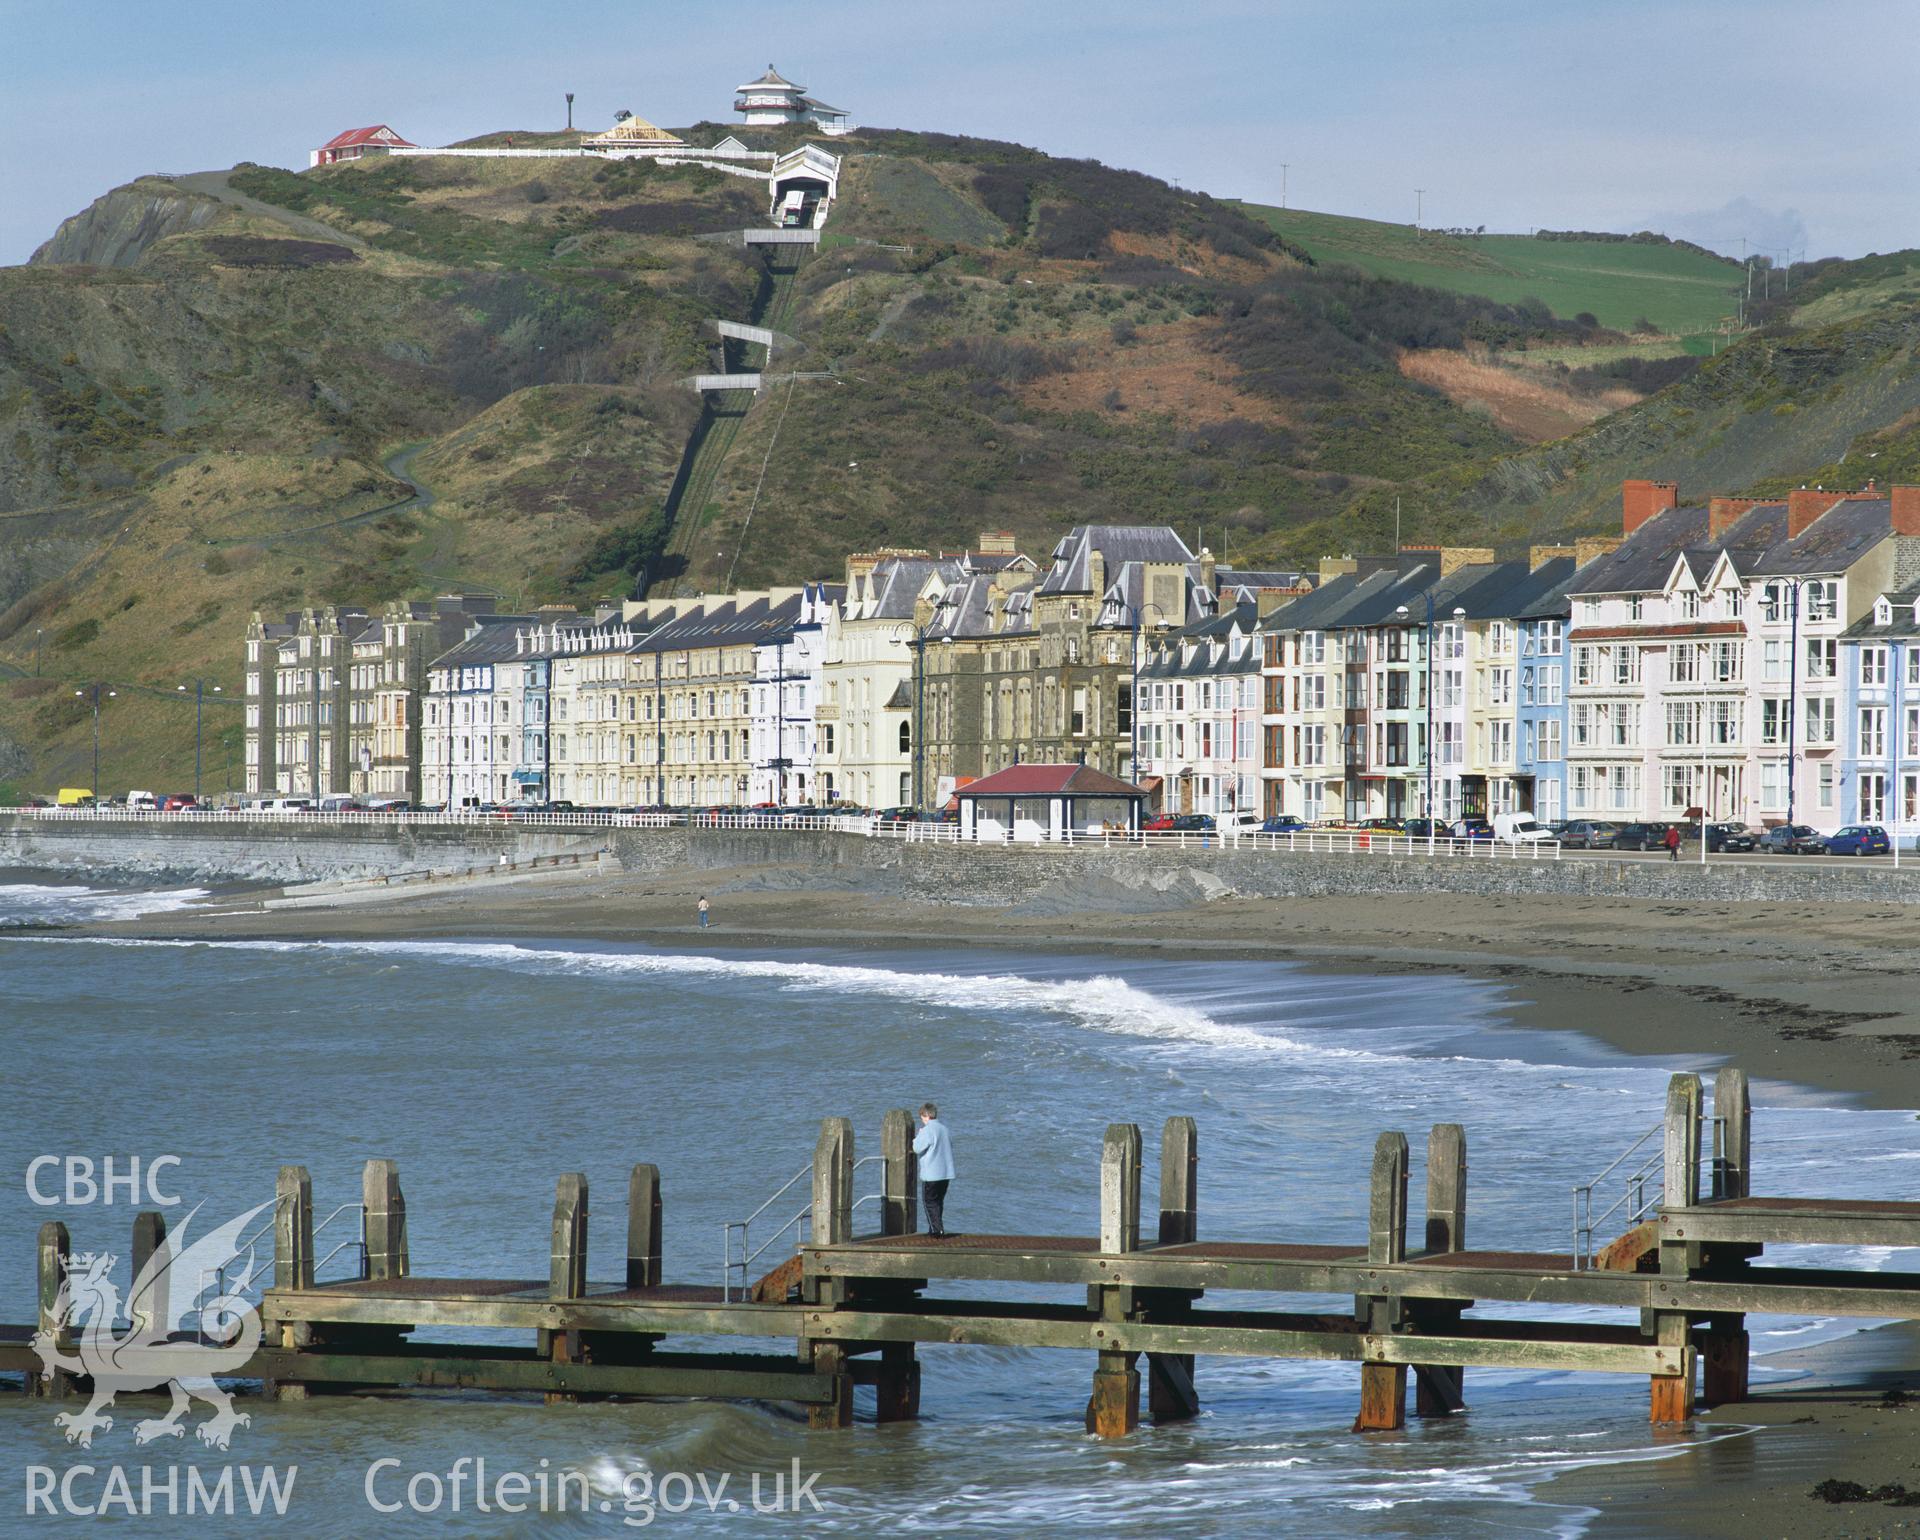 Colour transparency showing general view of the Promenade at Aberystwyth, produced by Iain Wright, June 2004.